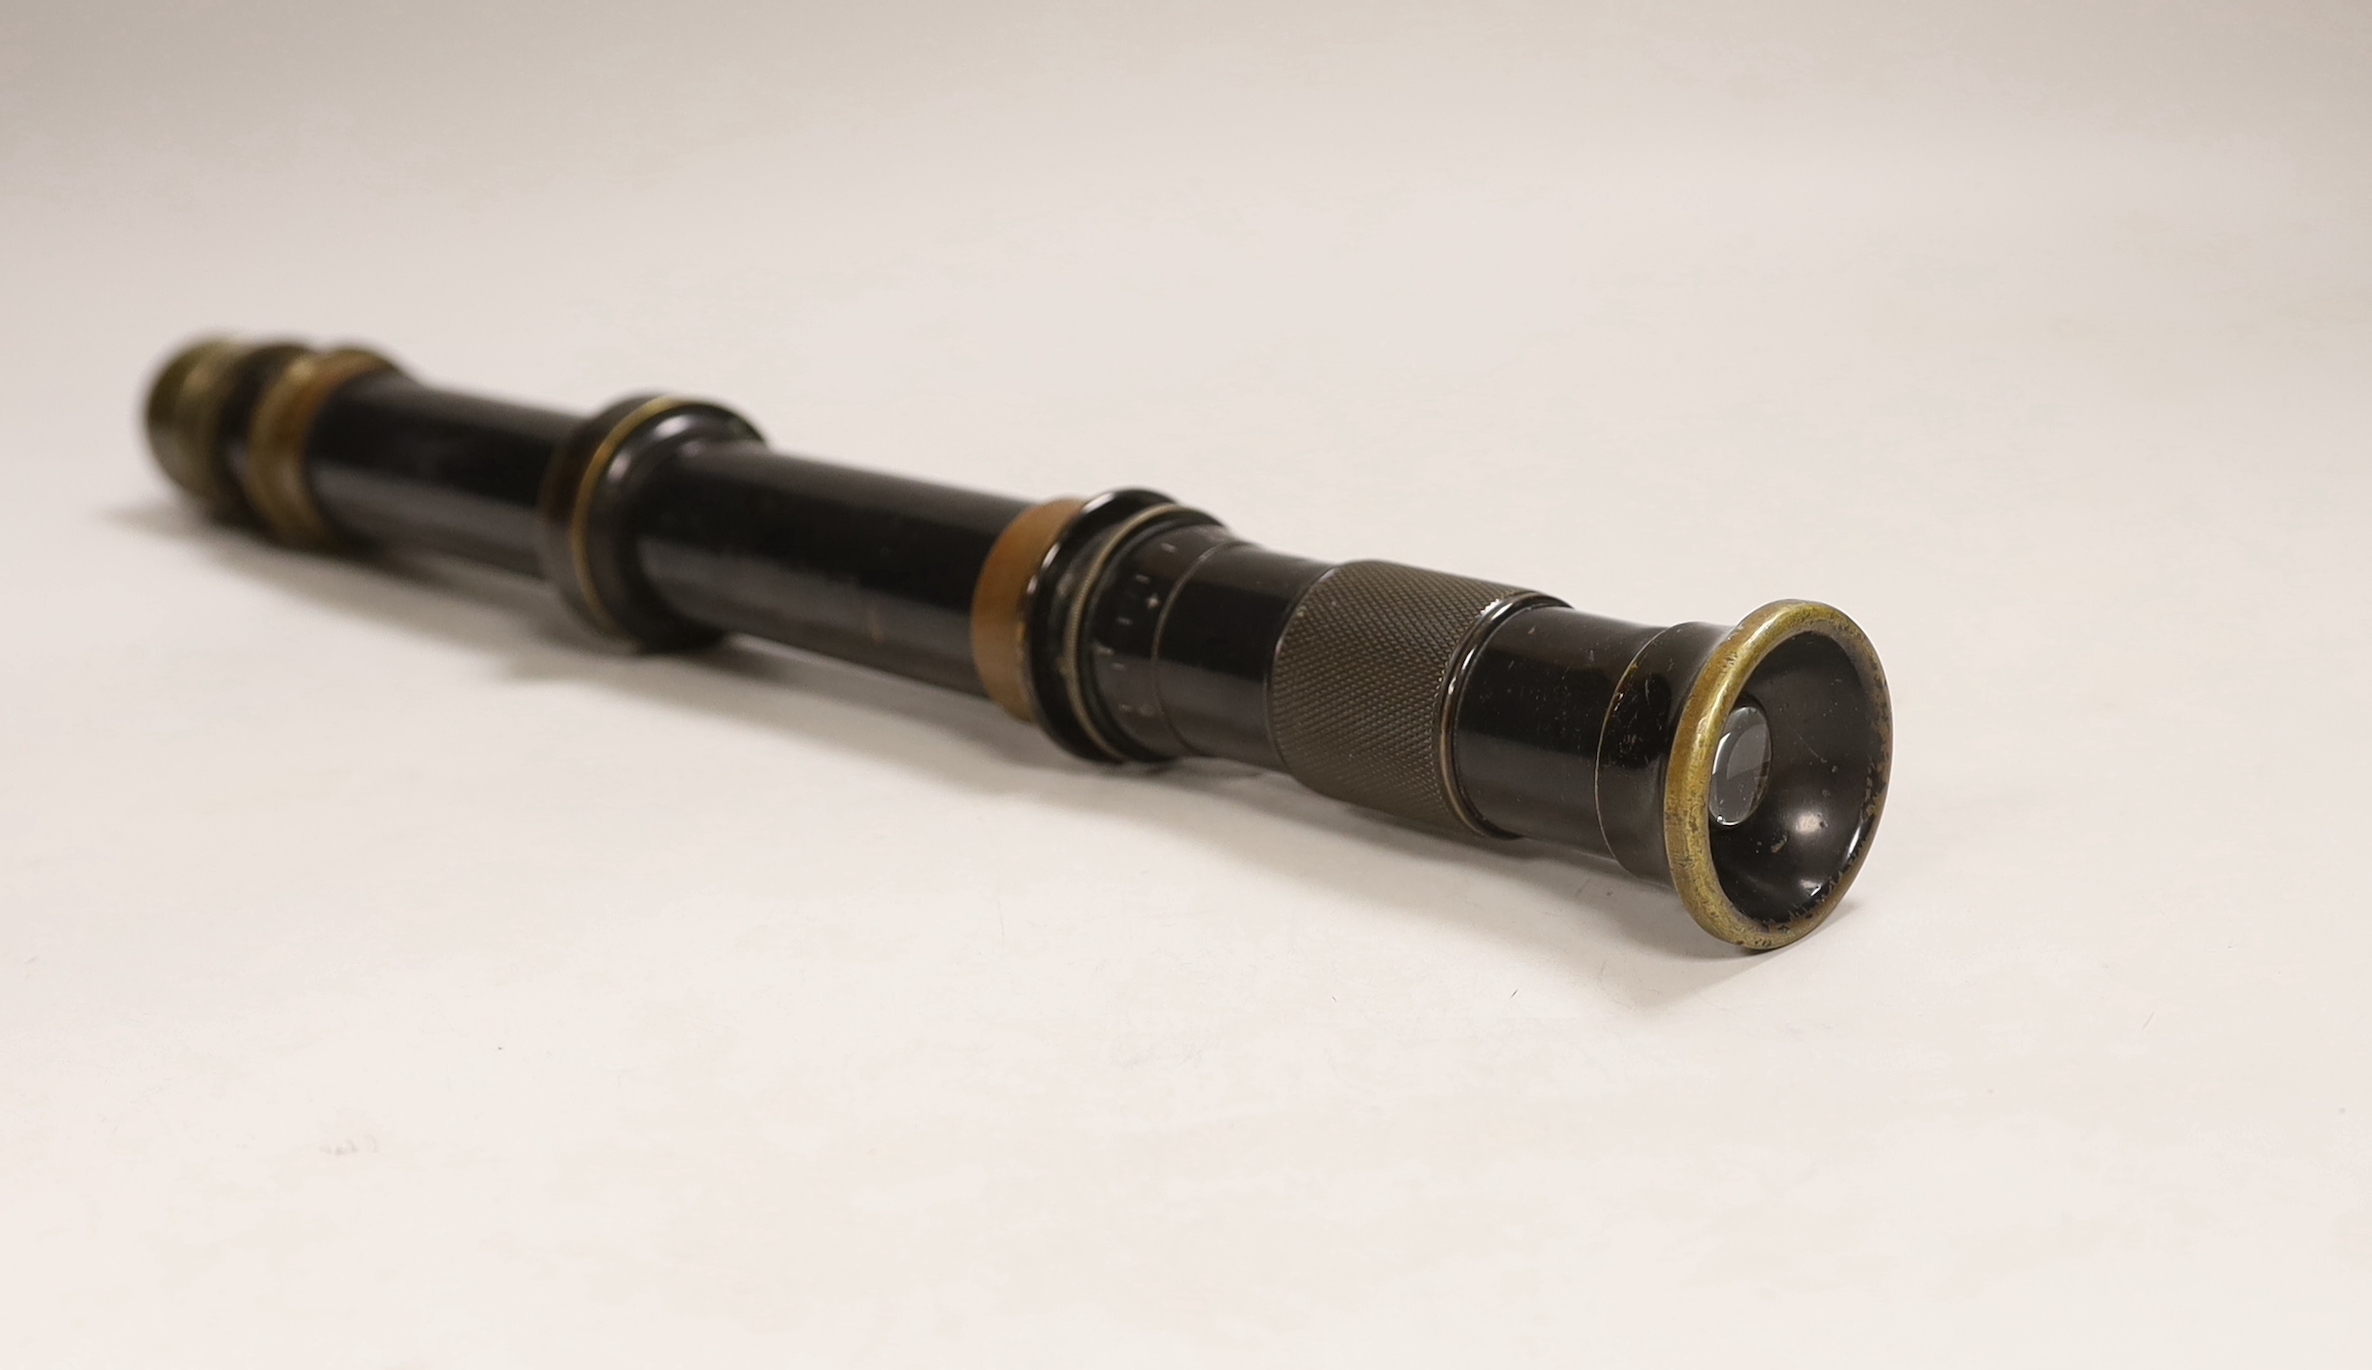 A WWI sighting telescope, W Watson & Sons, 1917, No.4 Mark III, with clear optics and cross hairs, 41.5cm